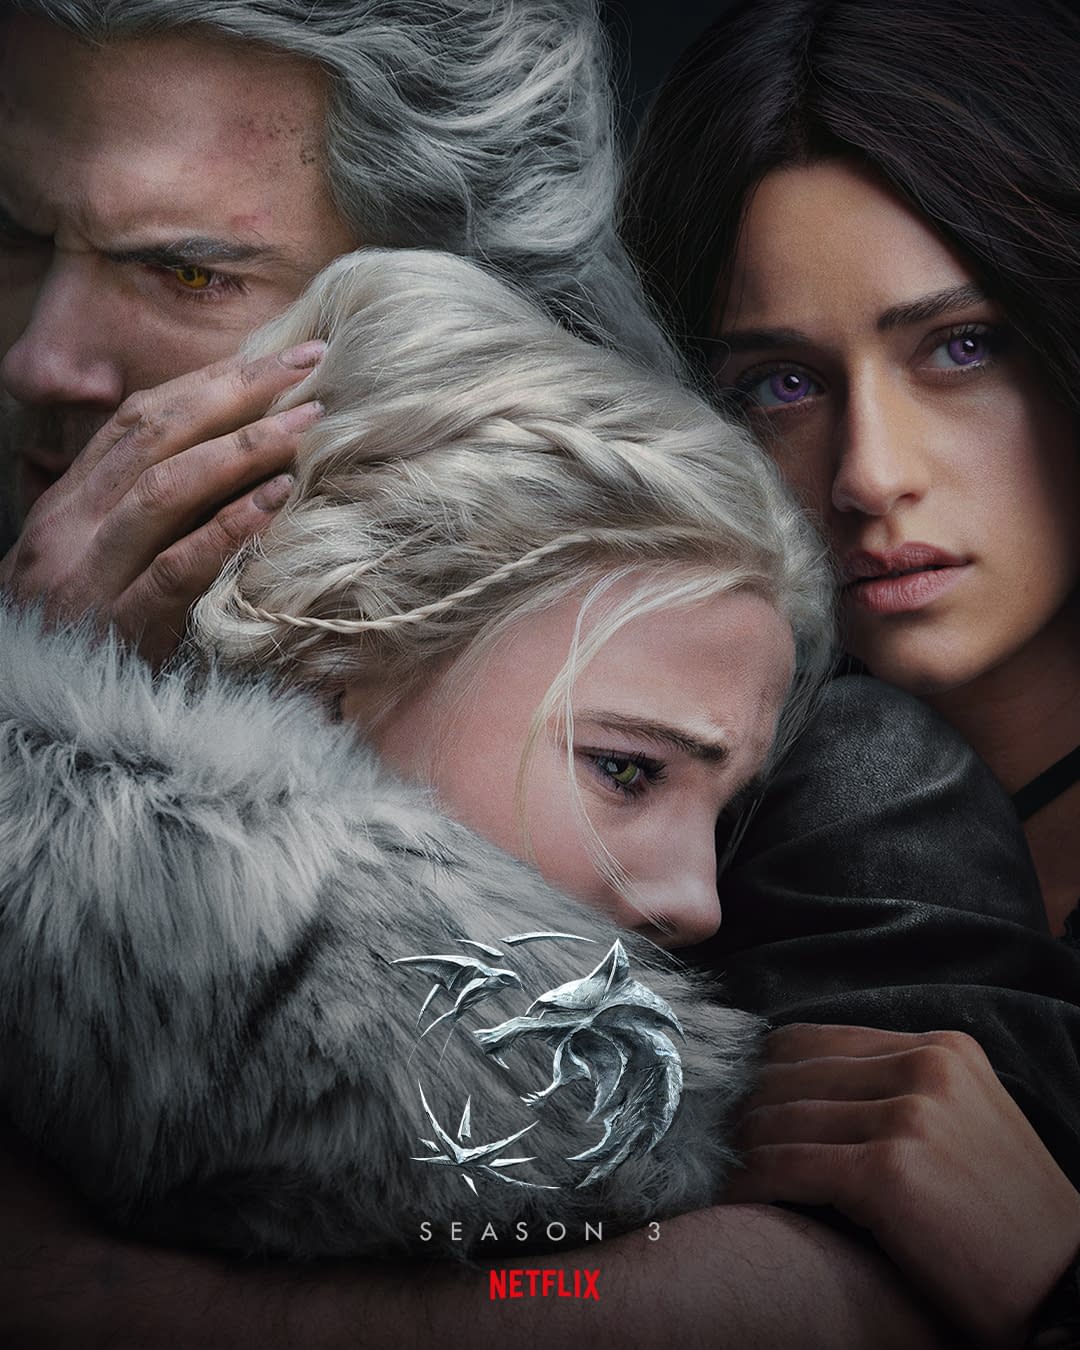 The Witcher Season 3 Volume 1: The Witcher Season 3 arrives on Netflix,  fans around the world gear up for a binge-watching marathon - The Economic  Times